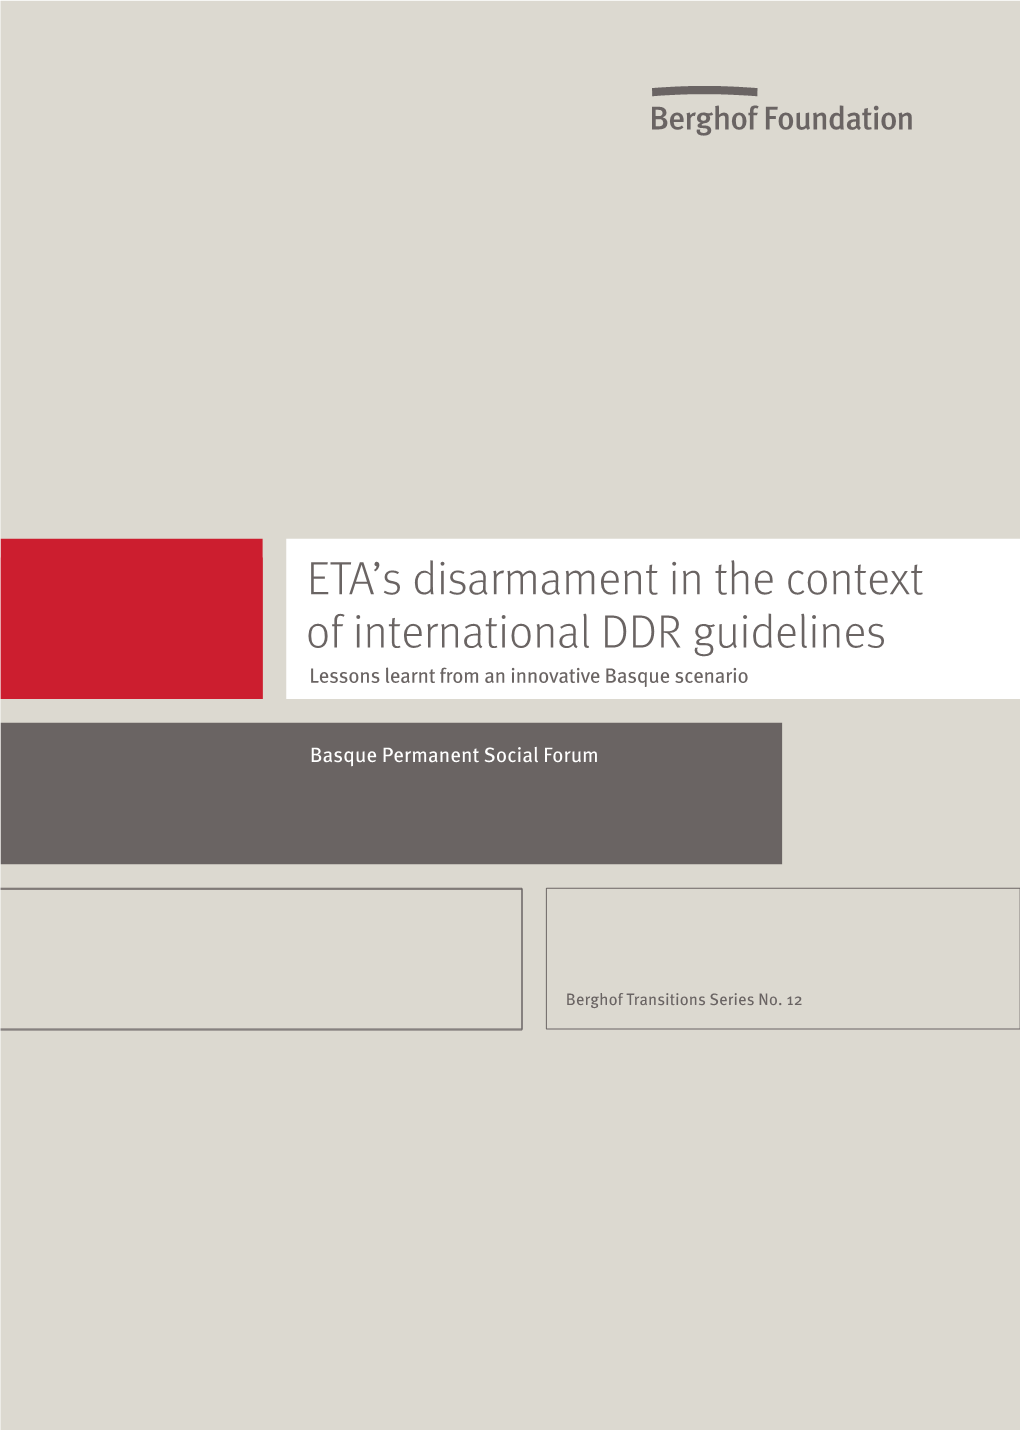 ETA's Disarmament in the Context of International DDR Guidelines